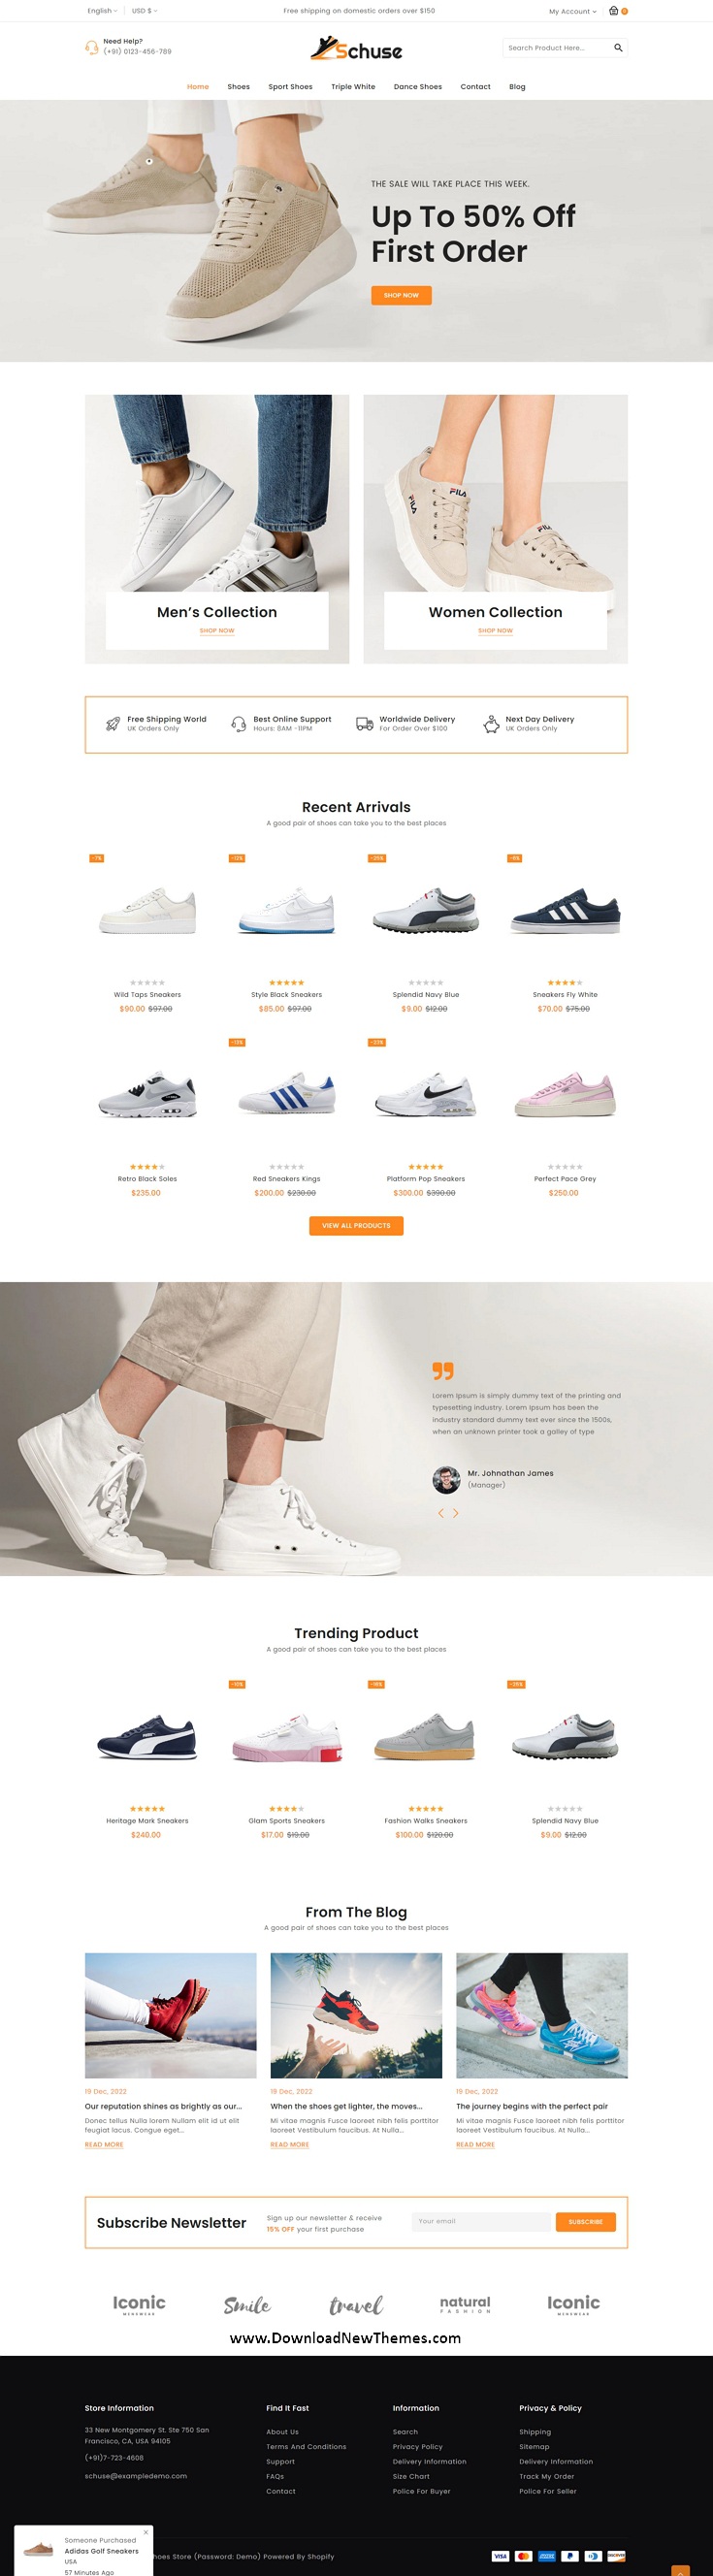 Schuse - Footwear Shoes Store Shopify 2.0 Responsive Theme Review